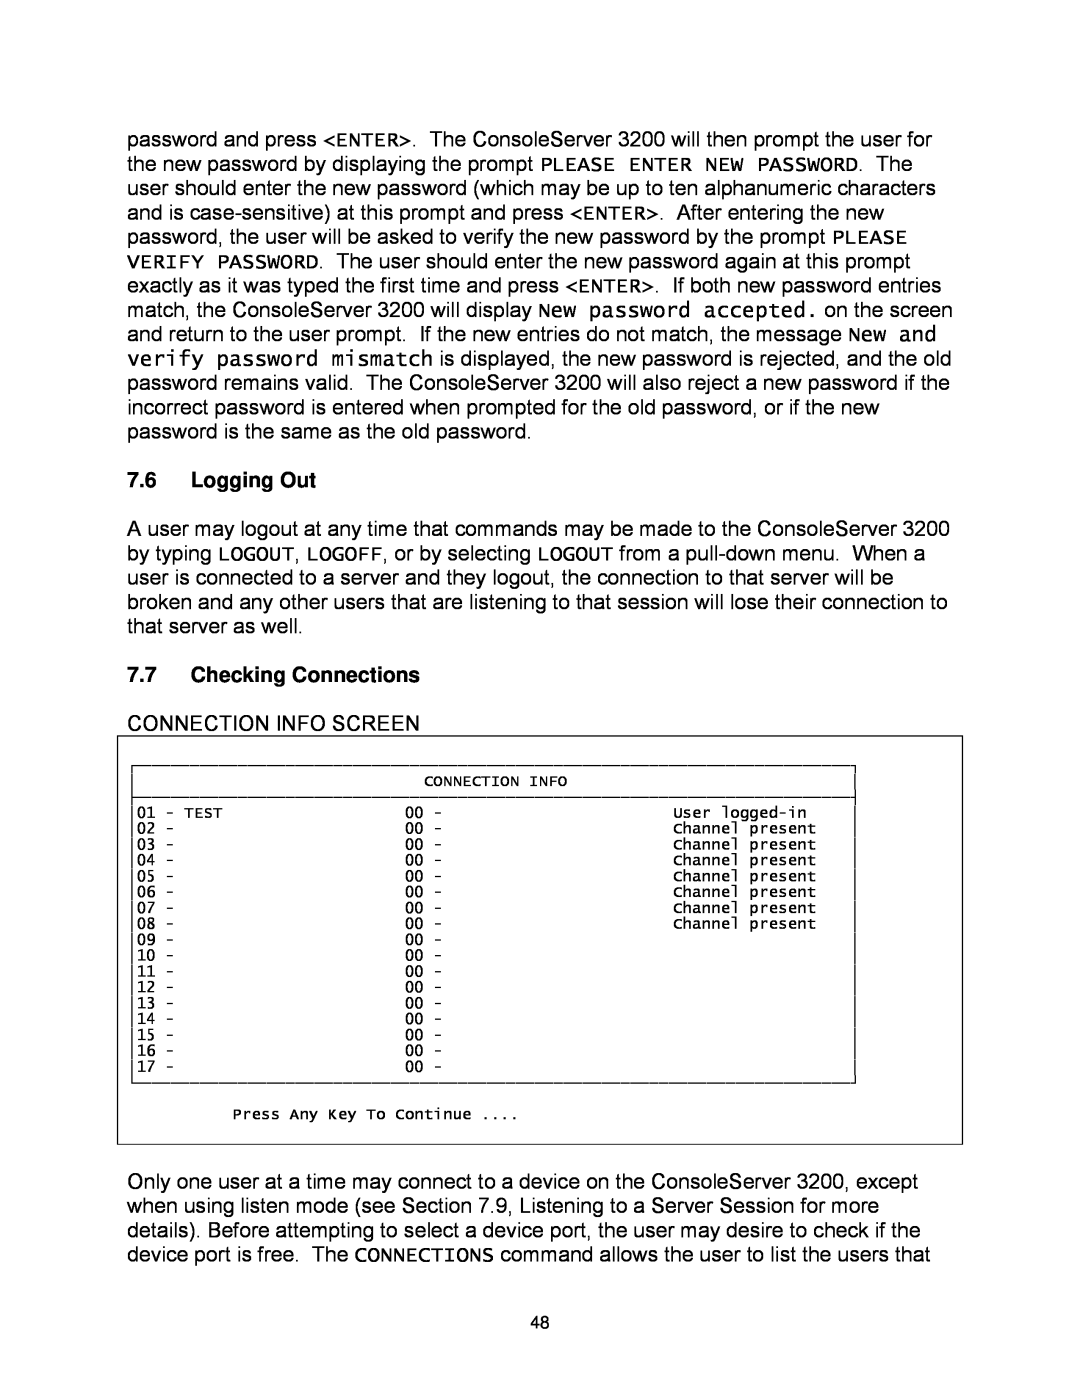 Lightwave Communications 3200 user manual Logging Out, Checking Connections 